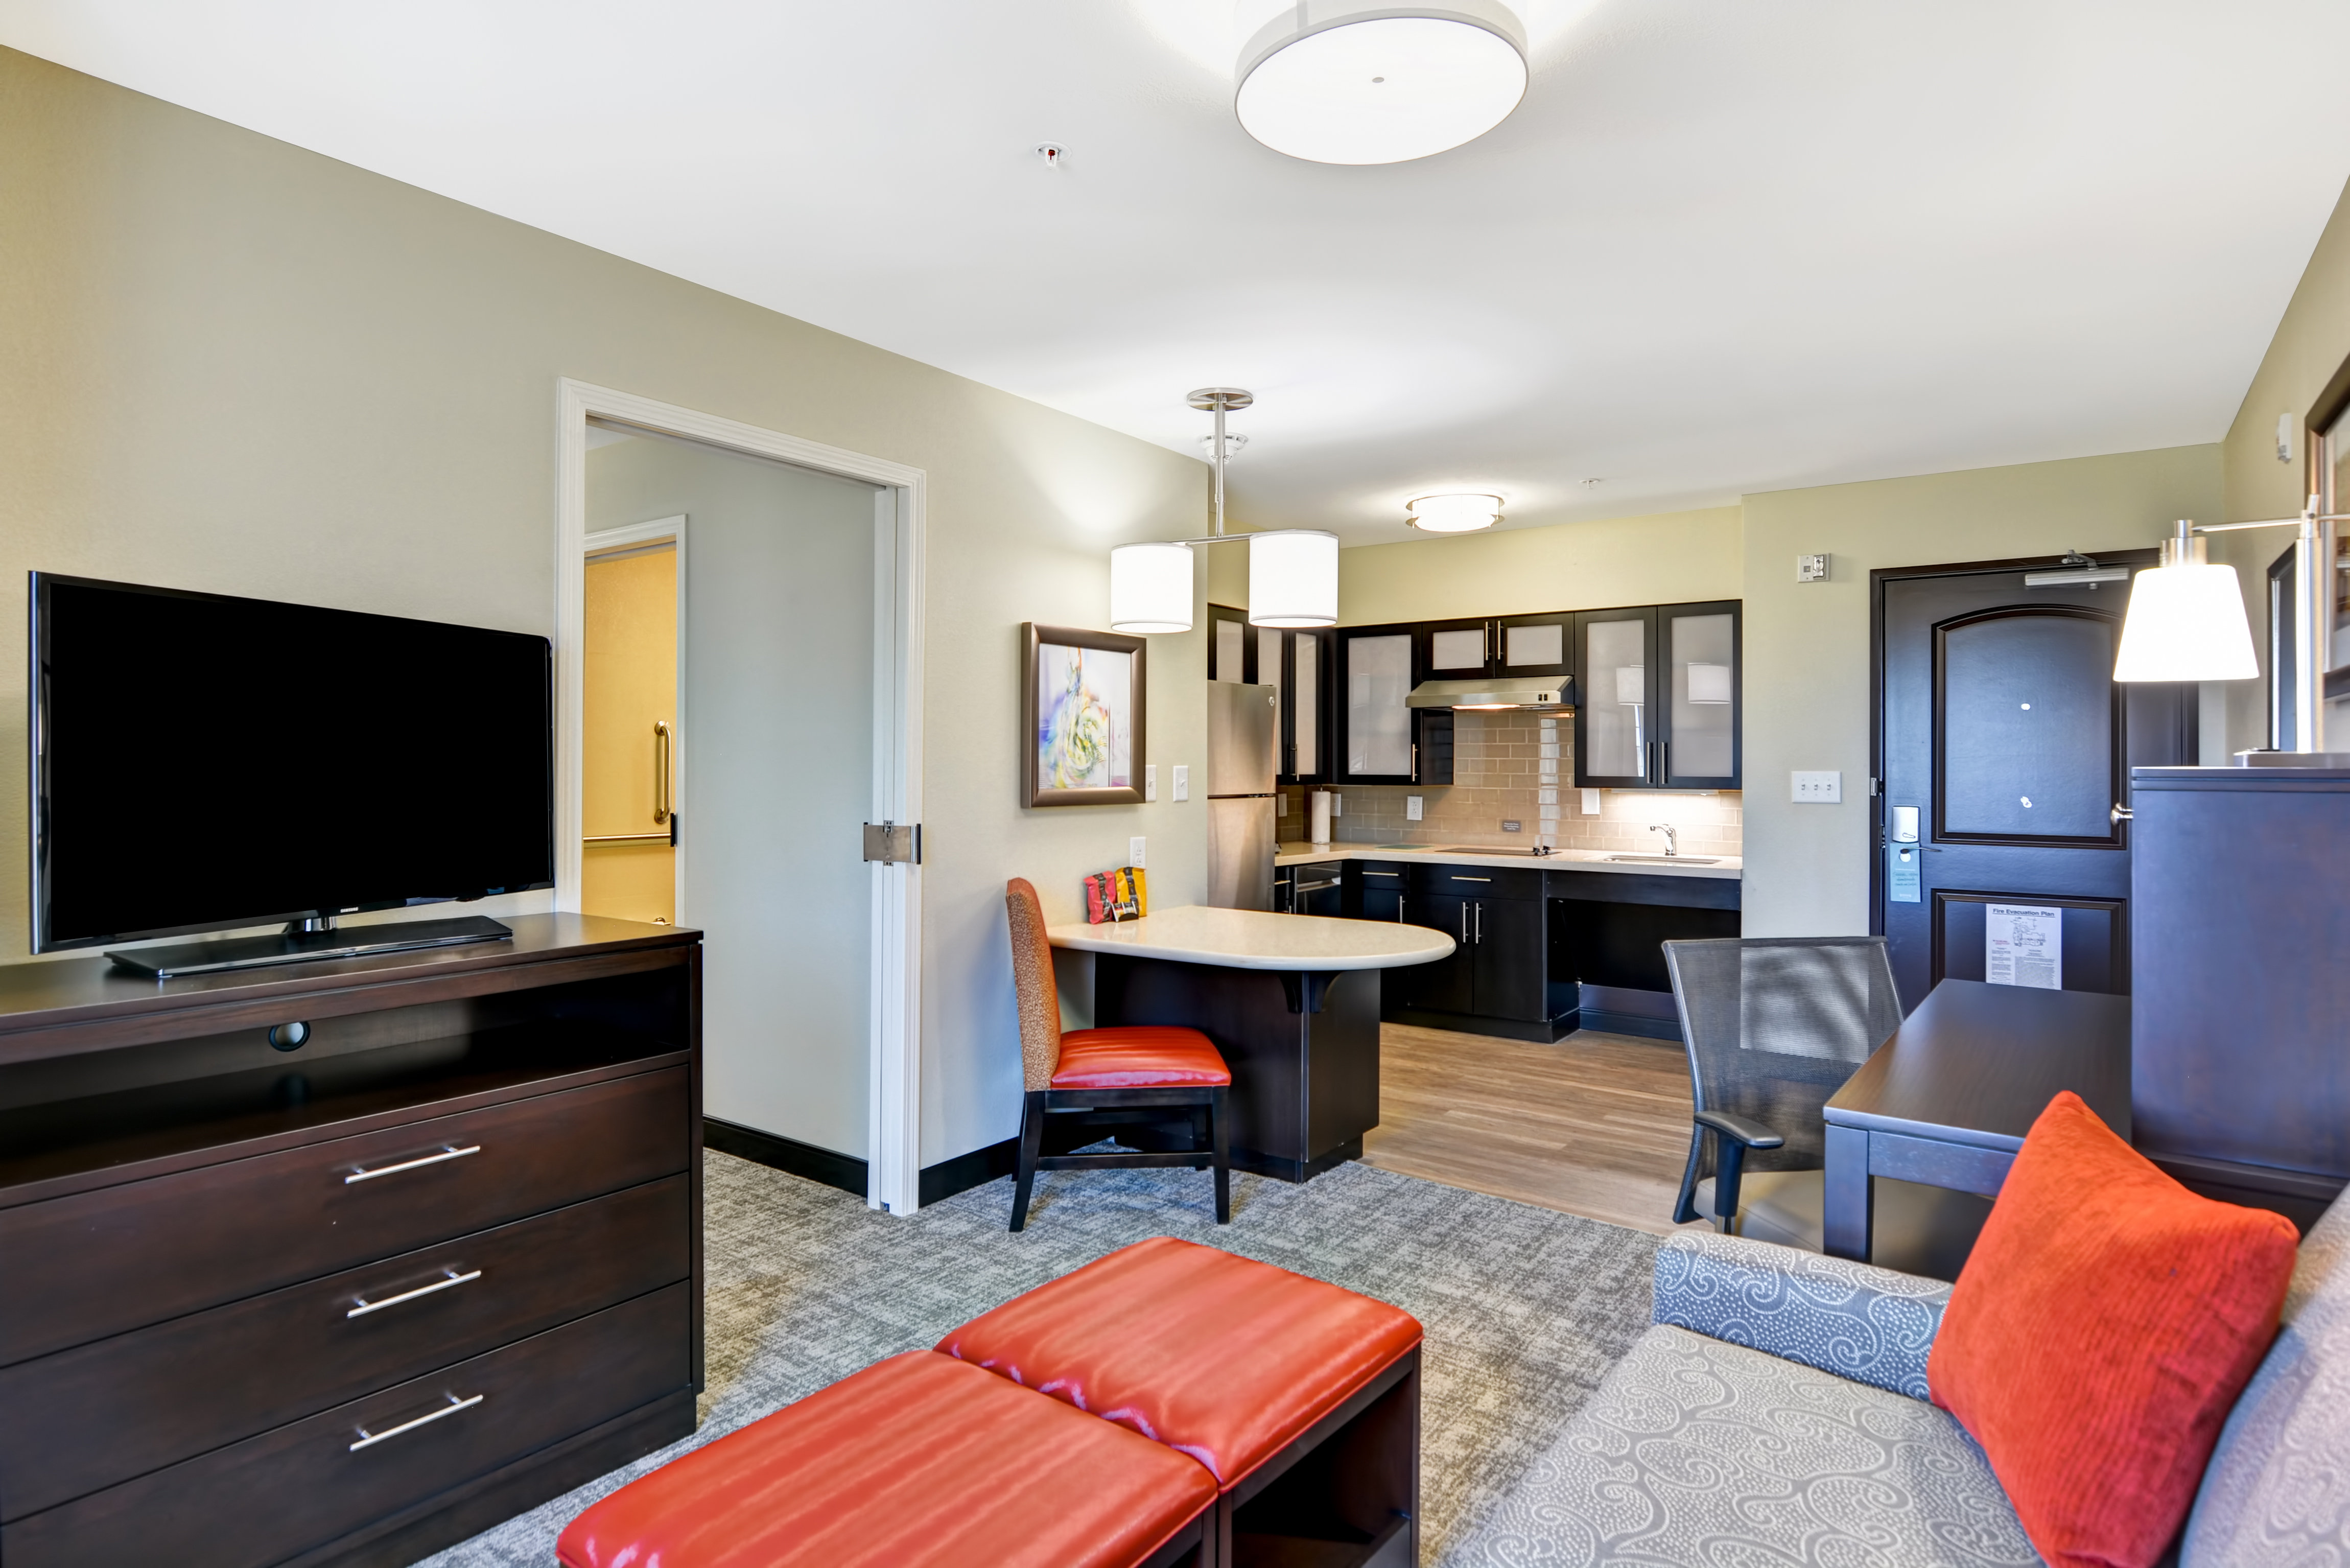 Our spacious suite in Mount Juliet where you can entertain guests.